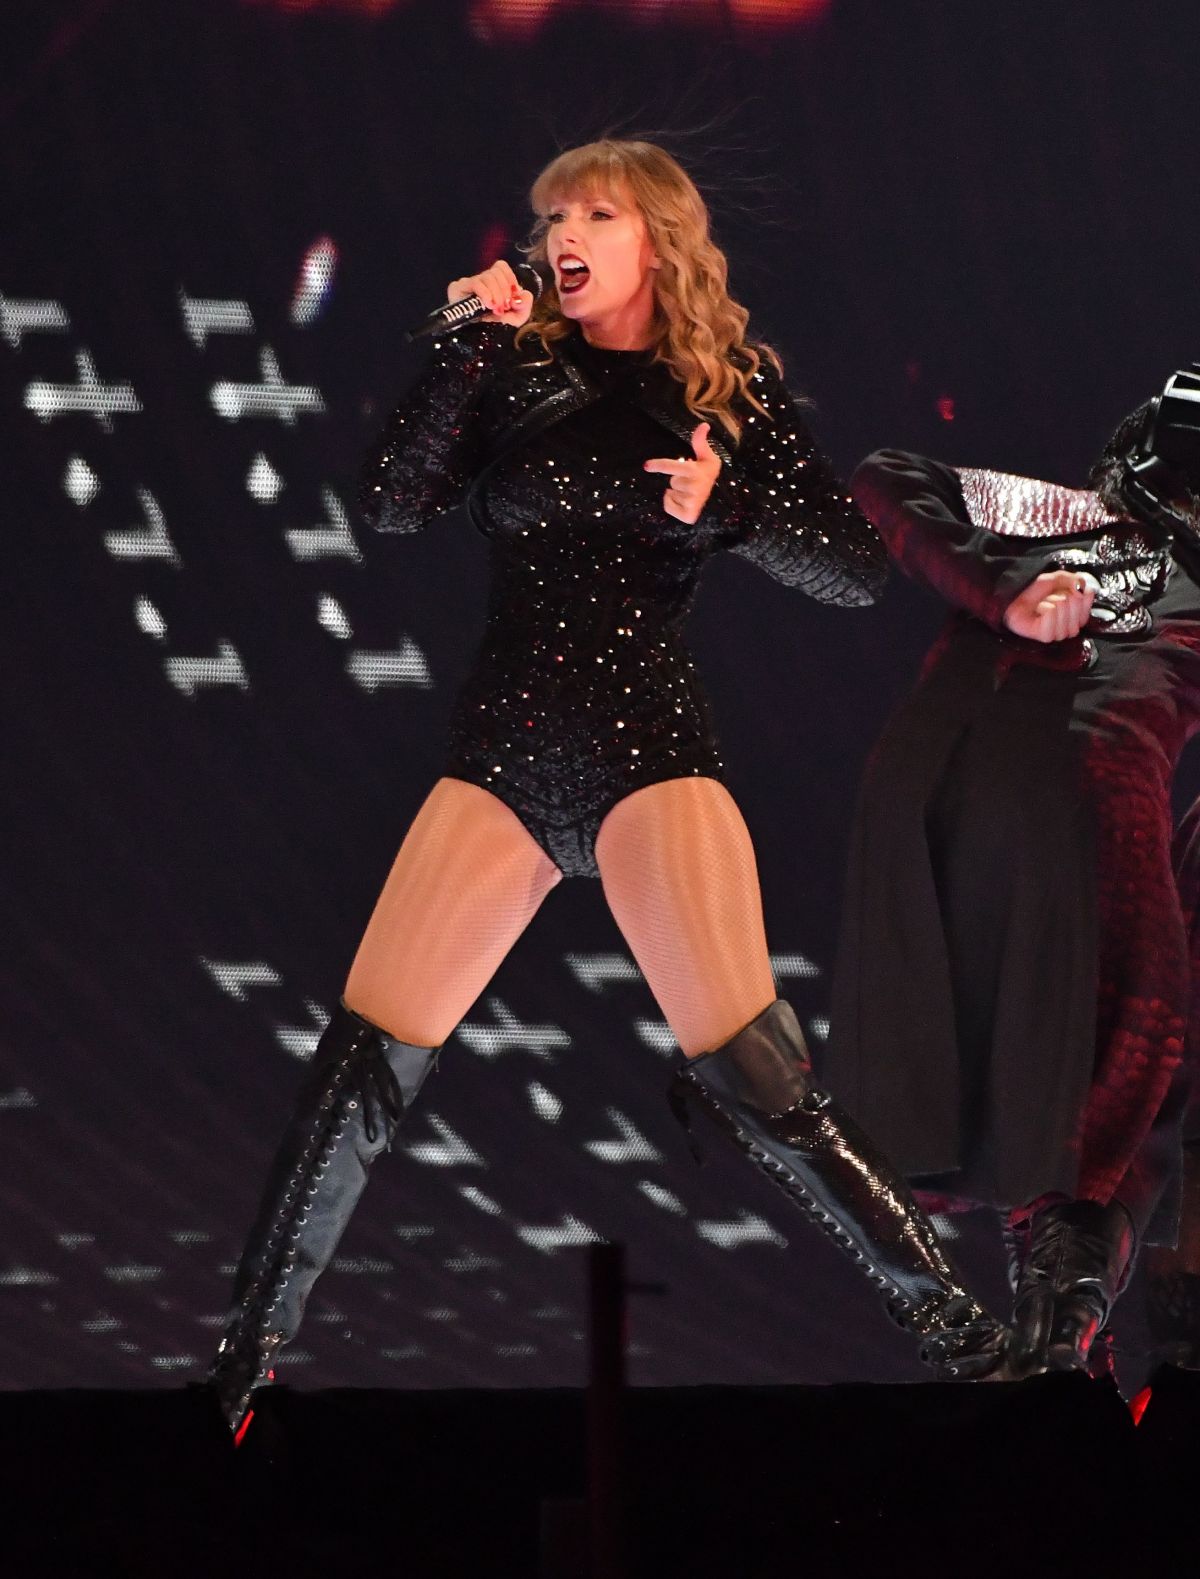 taylor-swift-performs-at-her-reputation-tour-in-detroit-08-28-2018-5.jpg